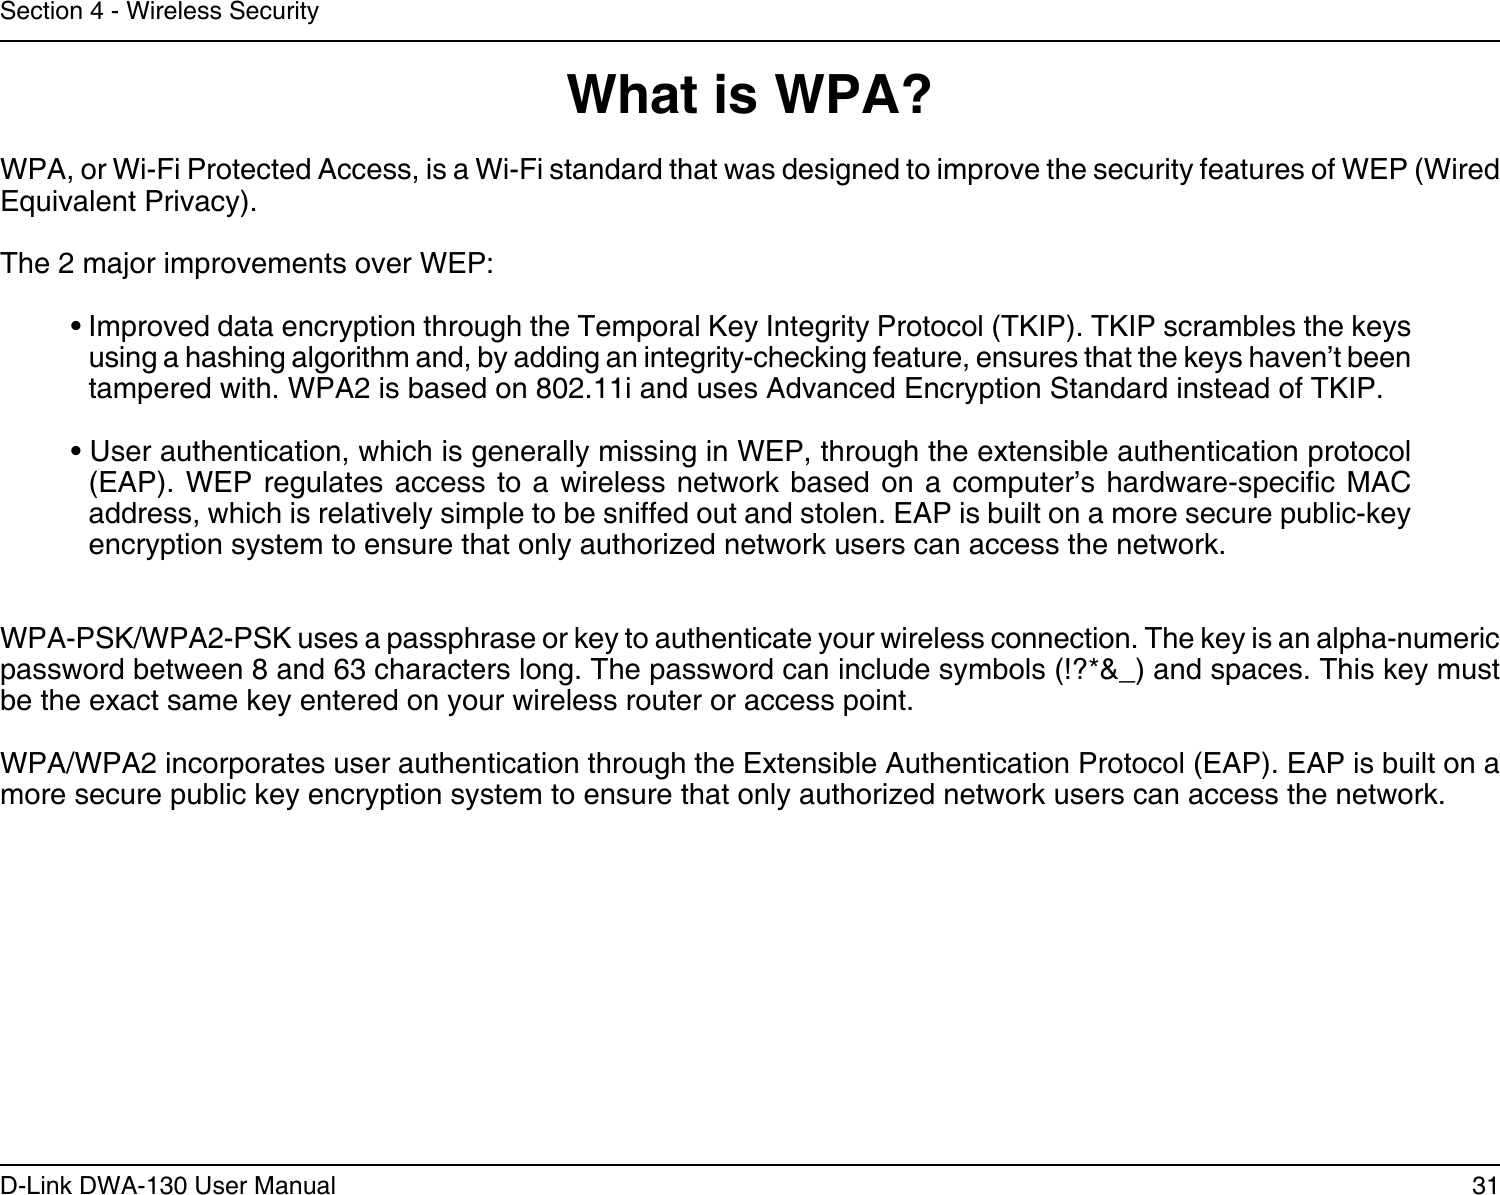 31D-Link DWA-130 User ManualSection 4 - Wireless SecurityWhat is WPA?WPA, or Wi-Fi Protected Access, is a Wi-Fi standard that was designed to improve the security features of WEP (Wired Equivalent Privacy).  The 2 major improvements over WEP: • Improved data encryption through the Temporal Key Integrity Protocol (TKIP). TKIP scrambles the keys using a hashing algorithm and, by adding an integrity-checking feature, ensures that the keys haven’t been tampered with. WPA2 is based on 802.11i and uses Advanced Encryption Standard instead of TKIP.• User authentication, which is generally missing in WEP, through the extensible authentication protocol (EAP). WEP  regulates access  to a wireless  network based  on a computer’s  hardware-specic MAC address, which is relatively simple to be sniffed out and stolen. EAP is built on a more secure public-key encryption system to ensure that only authorized network users can access the network.WPA-PSK/WPA2-PSK uses a passphrase or key to authenticate your wireless connection. The key is an alpha-numeric password between 8 and 63 characters long. The password can include symbols (!?*&amp;_) and spaces. This key must be the exact same key entered on your wireless router or access point.WPA/WPA2 incorporates user authentication through the Extensible Authentication Protocol (EAP). EAP is built on a more secure public key encryption system to ensure that only authorized network users can access the network.